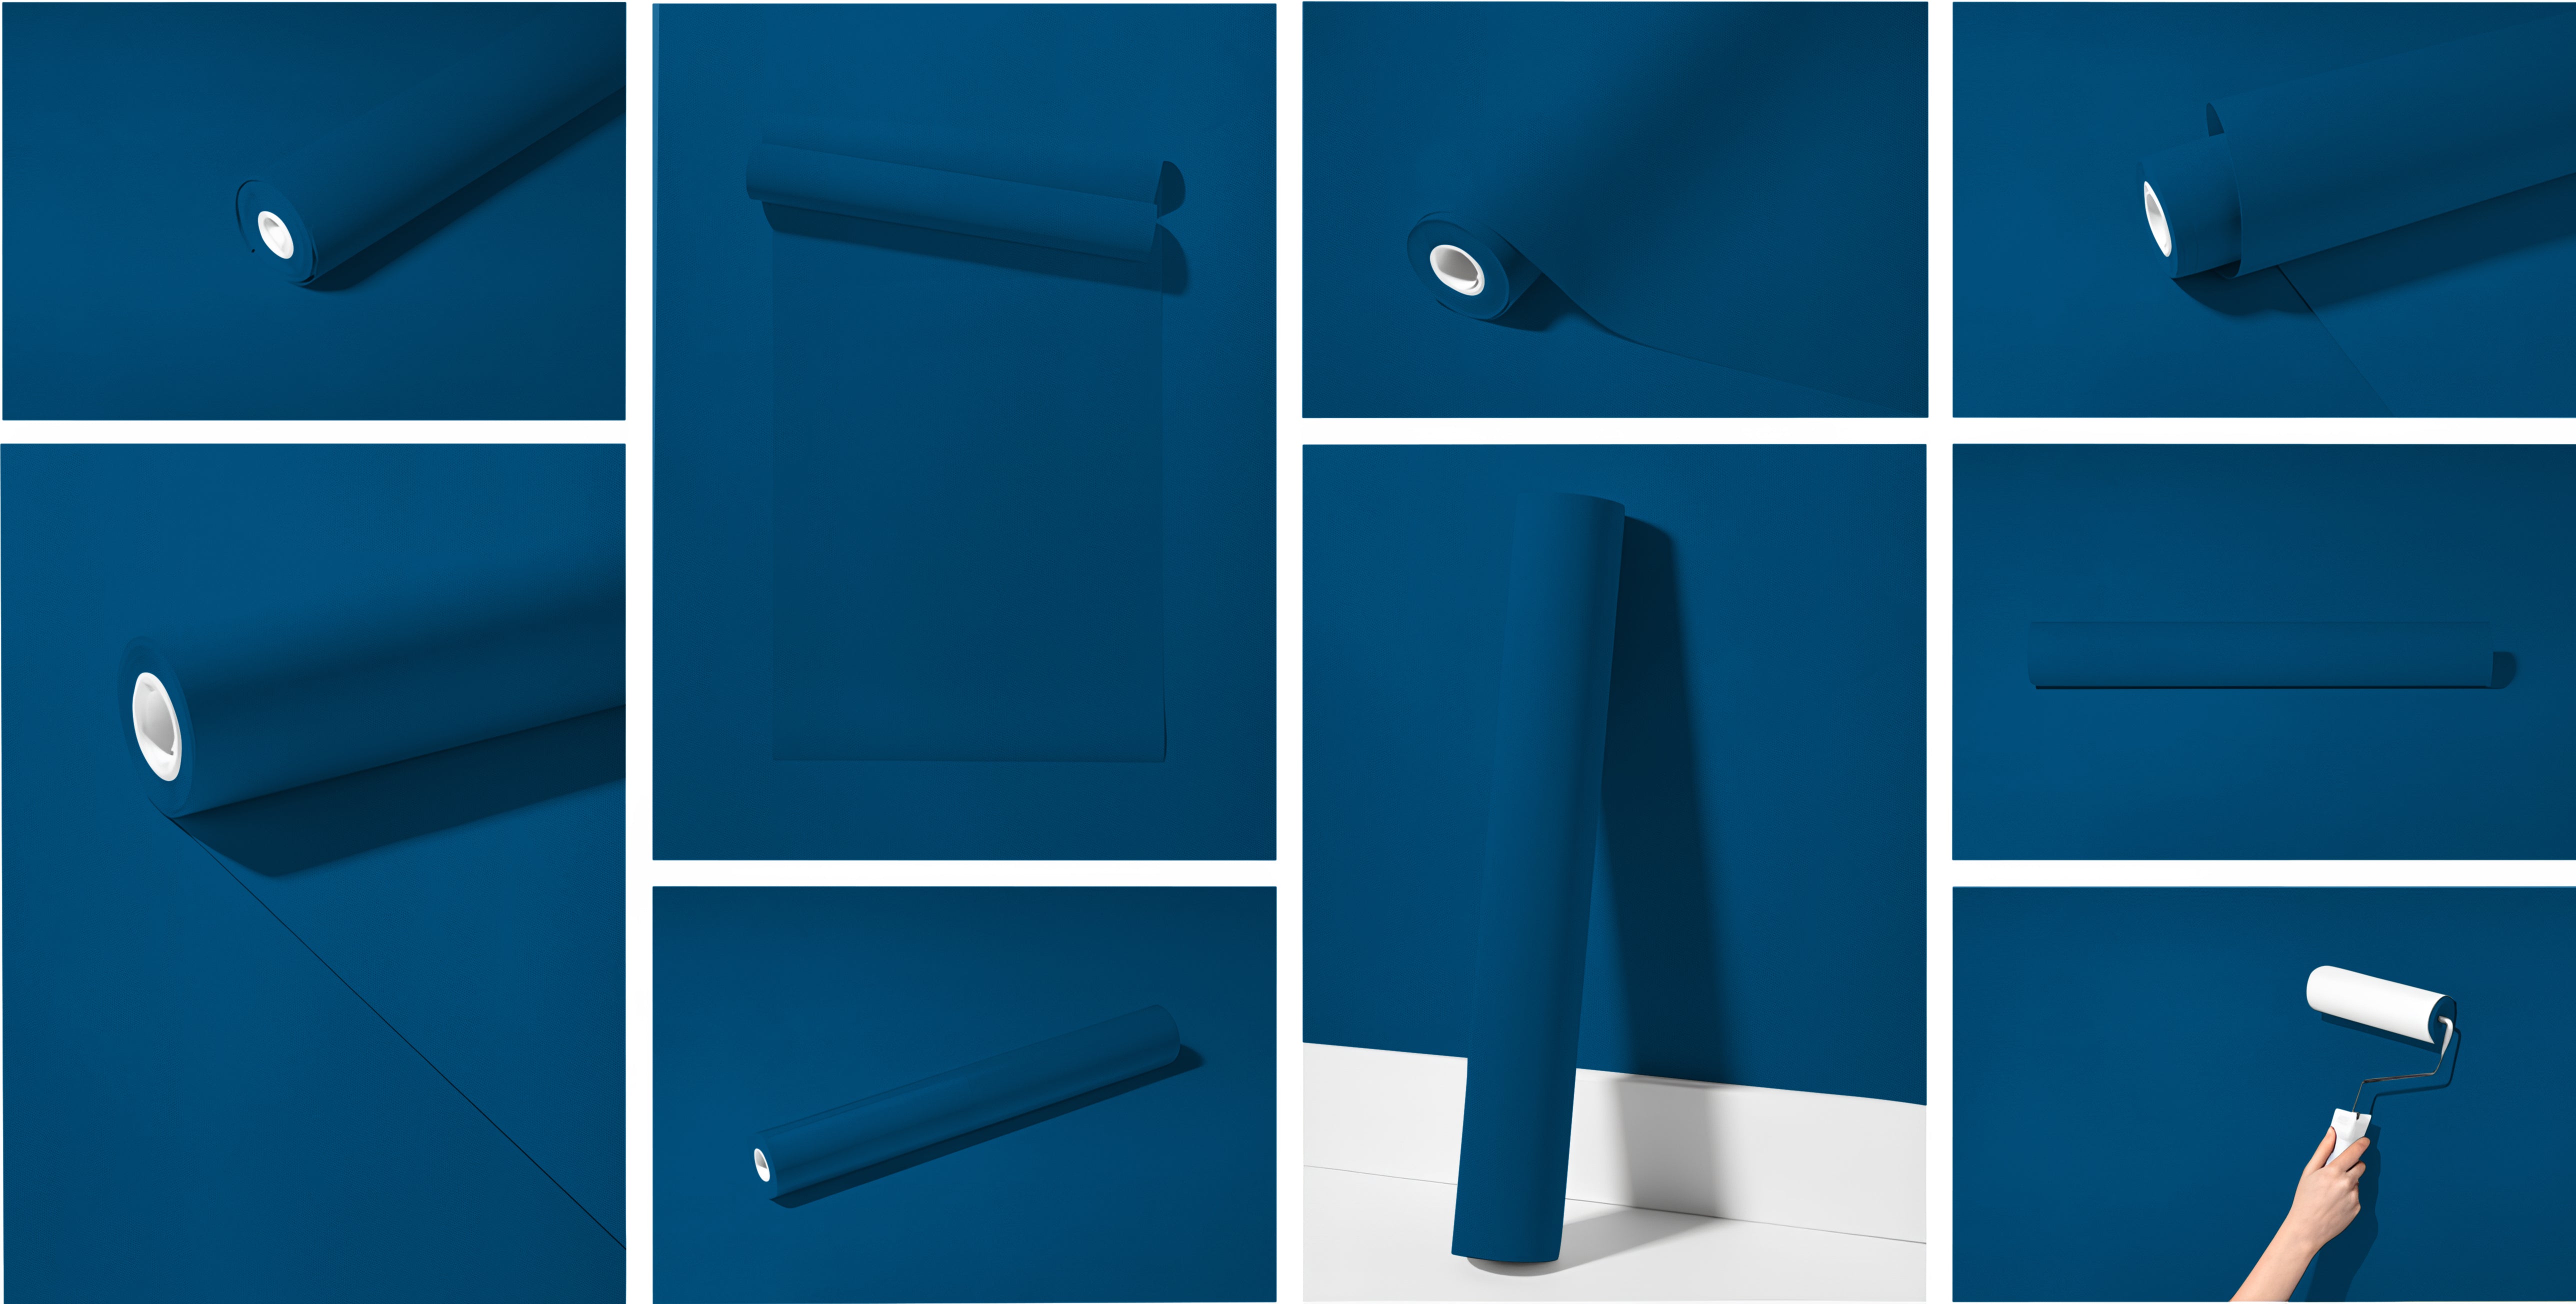 Peel & Stick Removable Re-usable Paint - Color RAL 5010 Gentian Blue - offRAL™ - RALRAW LLC, USA